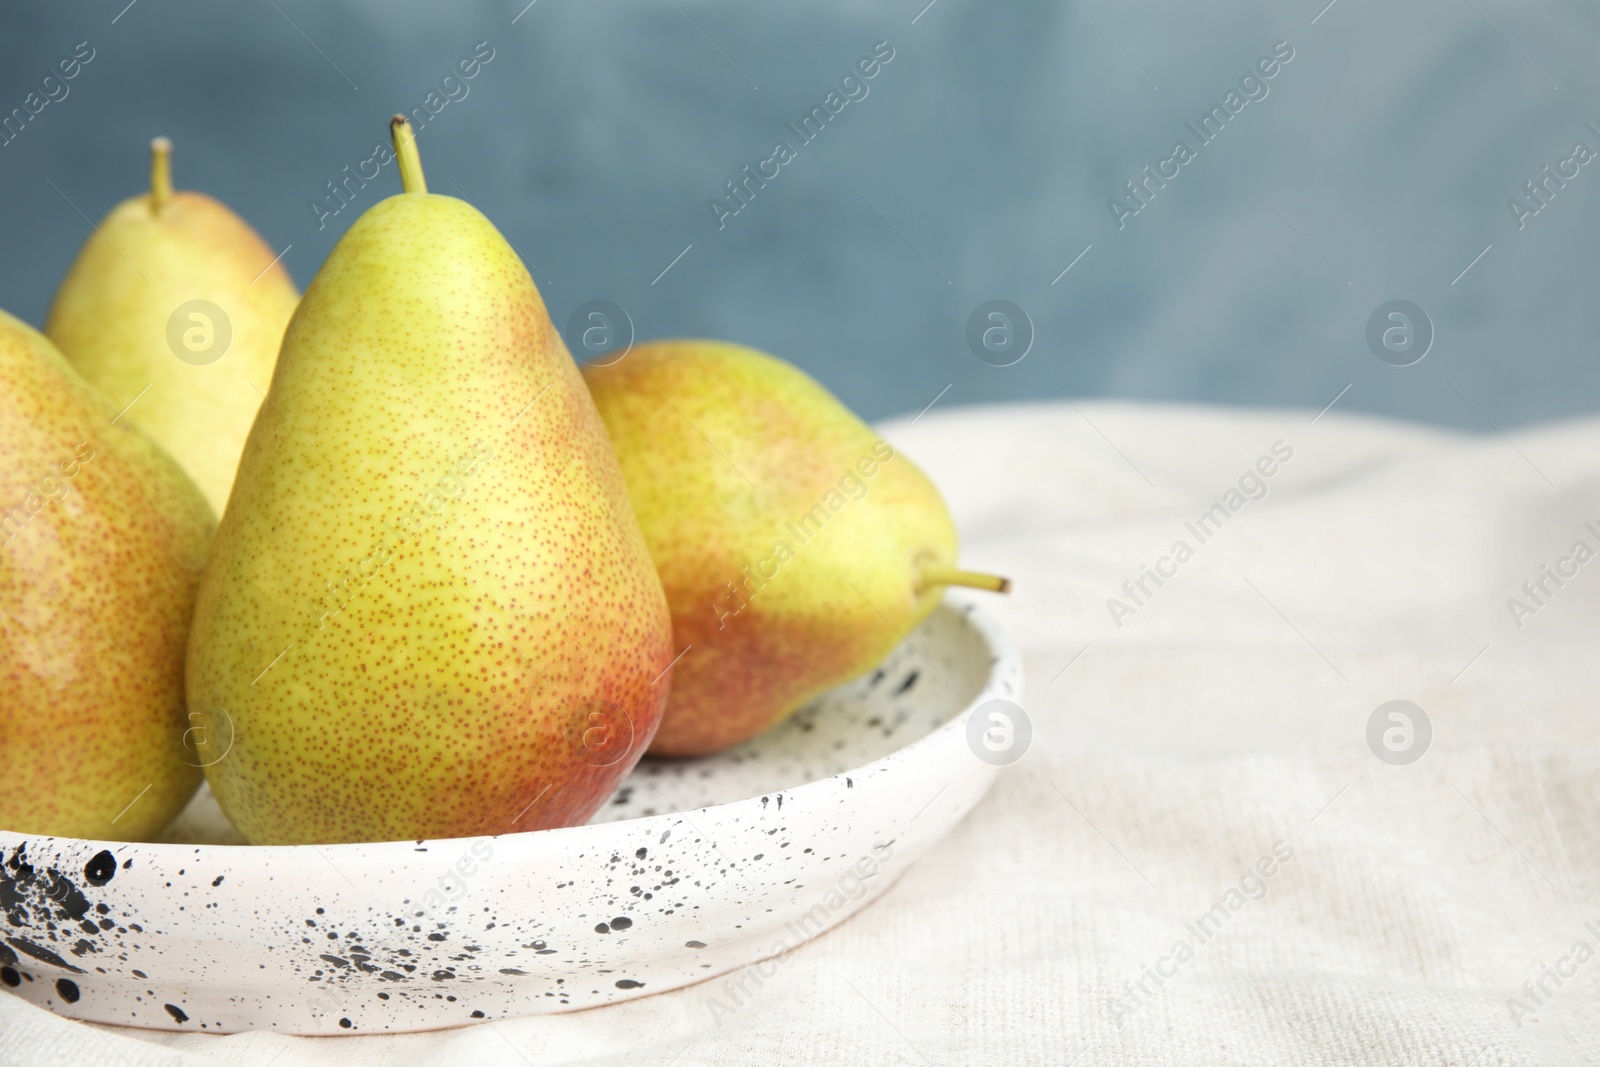 Photo of Plate with ripe juicy pears on light fabric against blue background, closeup. Space for text